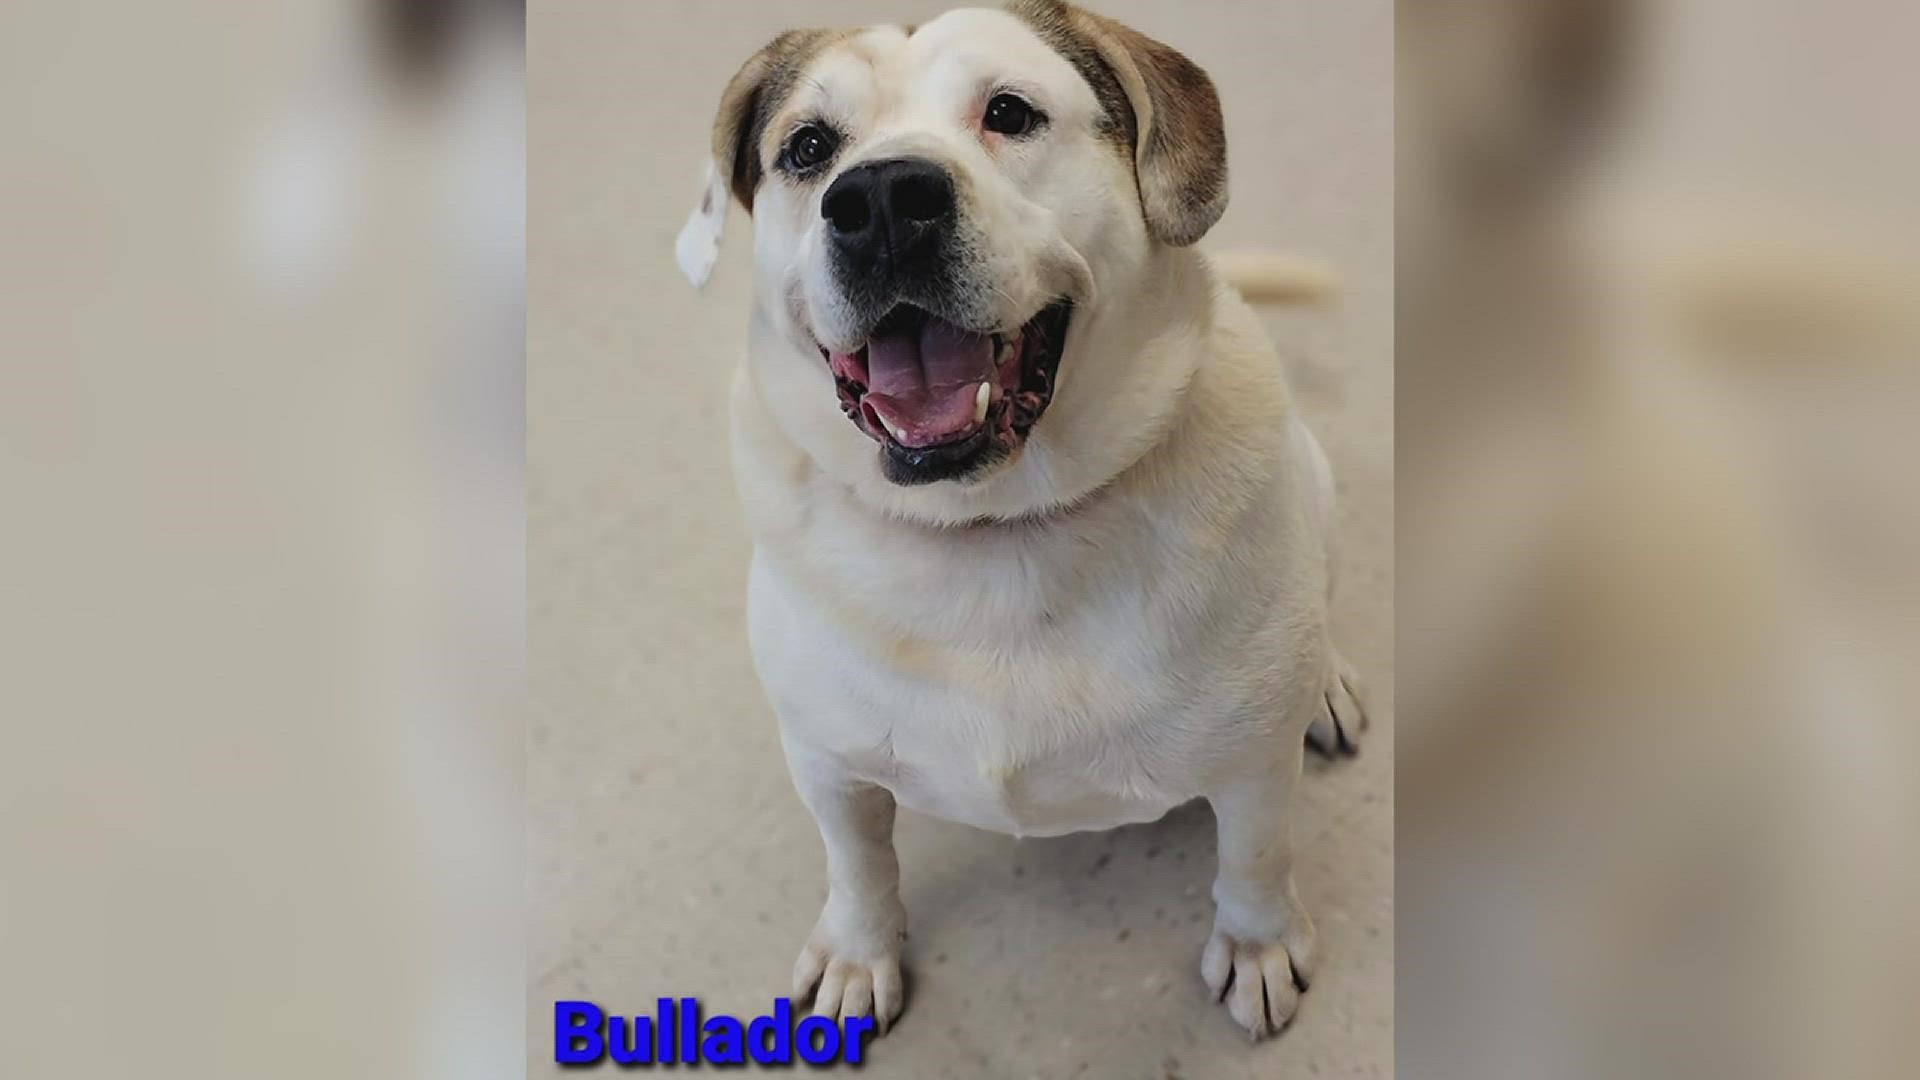 The Quad City Animal Welfare Center's Pet of the Week for Tuesday, November 30th, 2021 is Bullador!